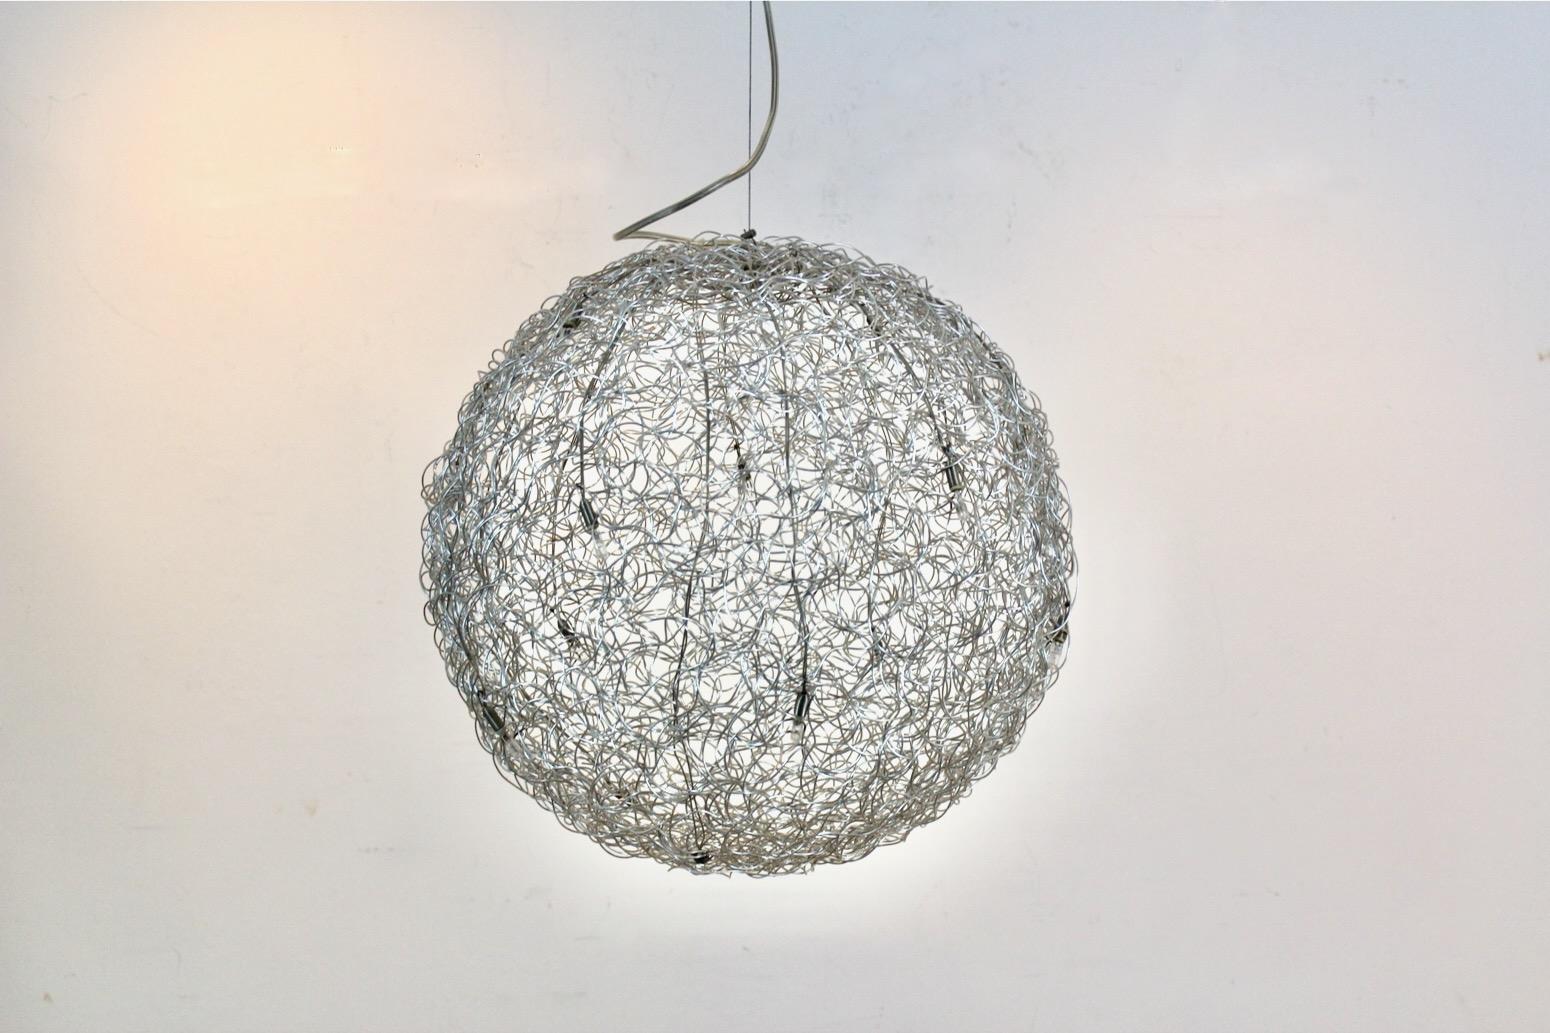 The beautiful sculptural ‘Fil de Fer’ hanging lamp is designed by Catellani & Smith. Fil de Fer is a lighting fixture made of shaped, woven aluminum wire, which is lit by tiny bulbs. Designed and made by Enzo Catellani, it is a creation close to his